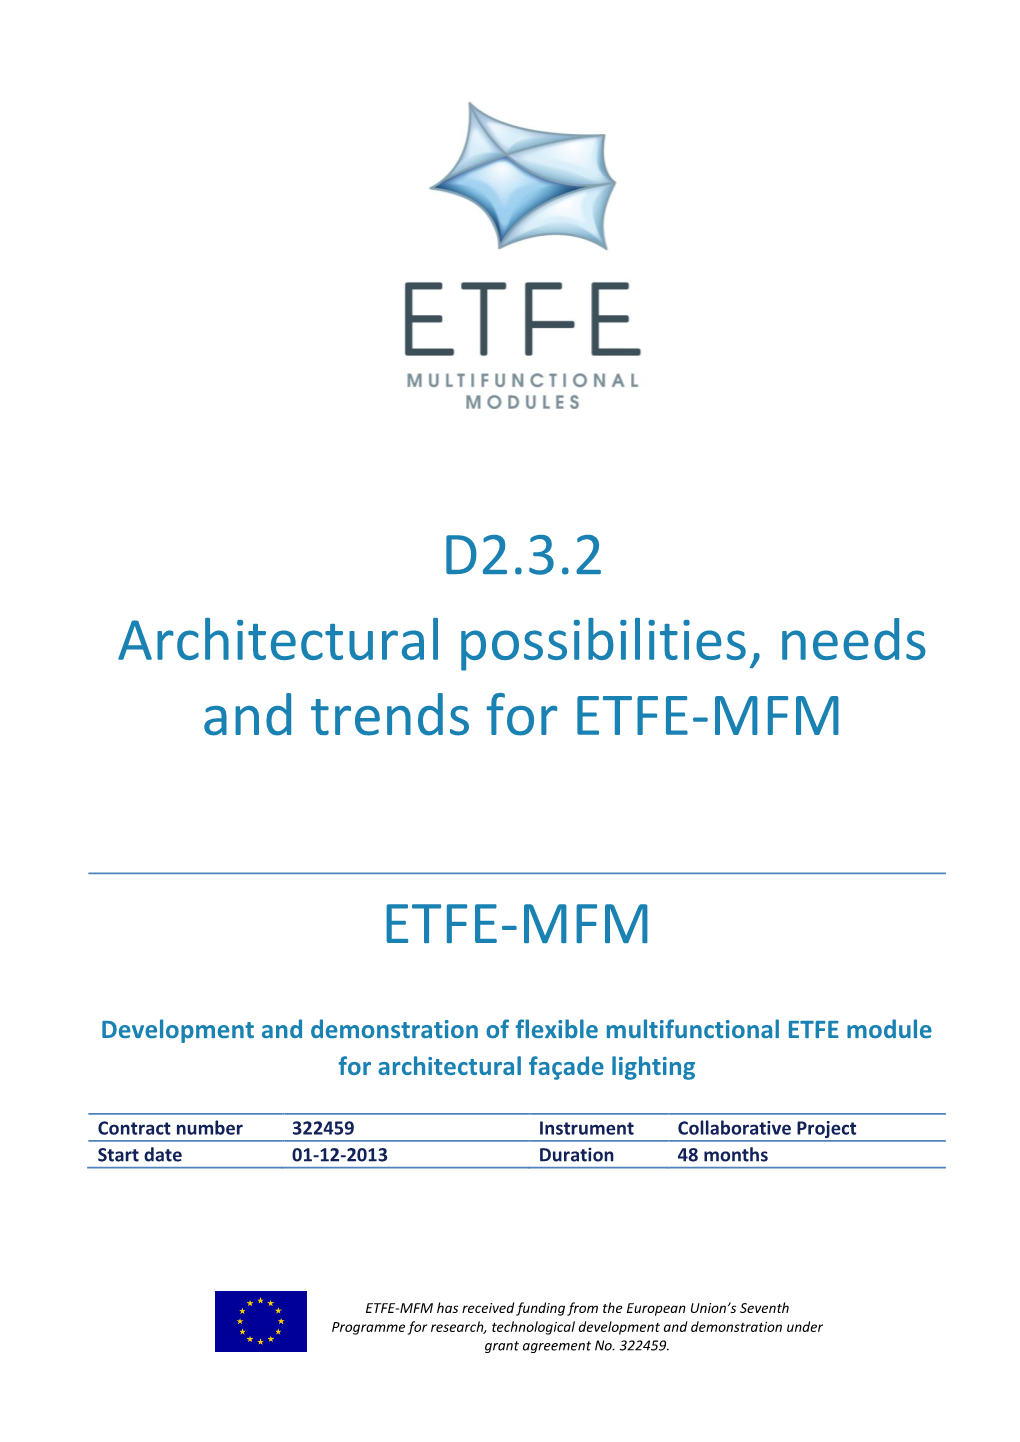 D2.3.2 Architectural Possibilities, Needs and Trends for ETFE-MFM